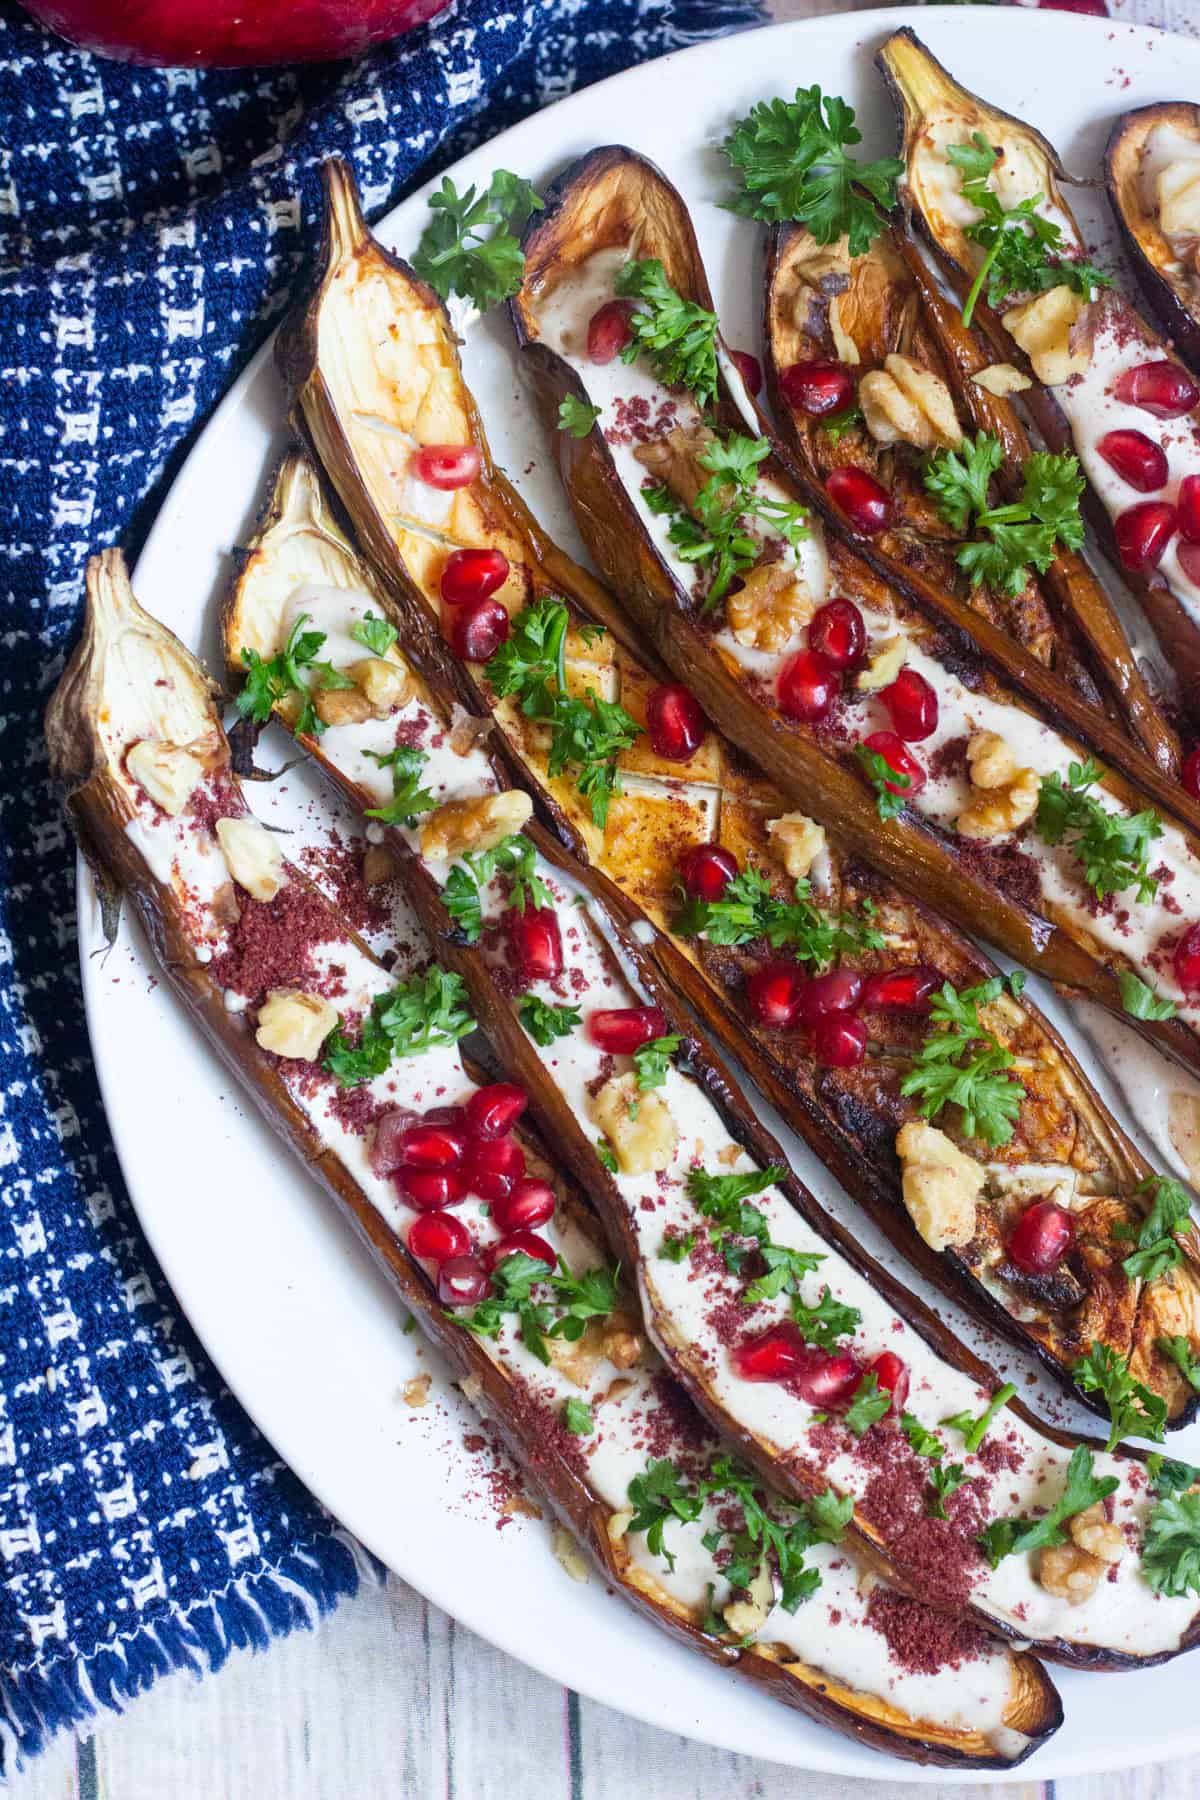 Slices of eggplant roasted and topped with yogurt tahini sauce. 